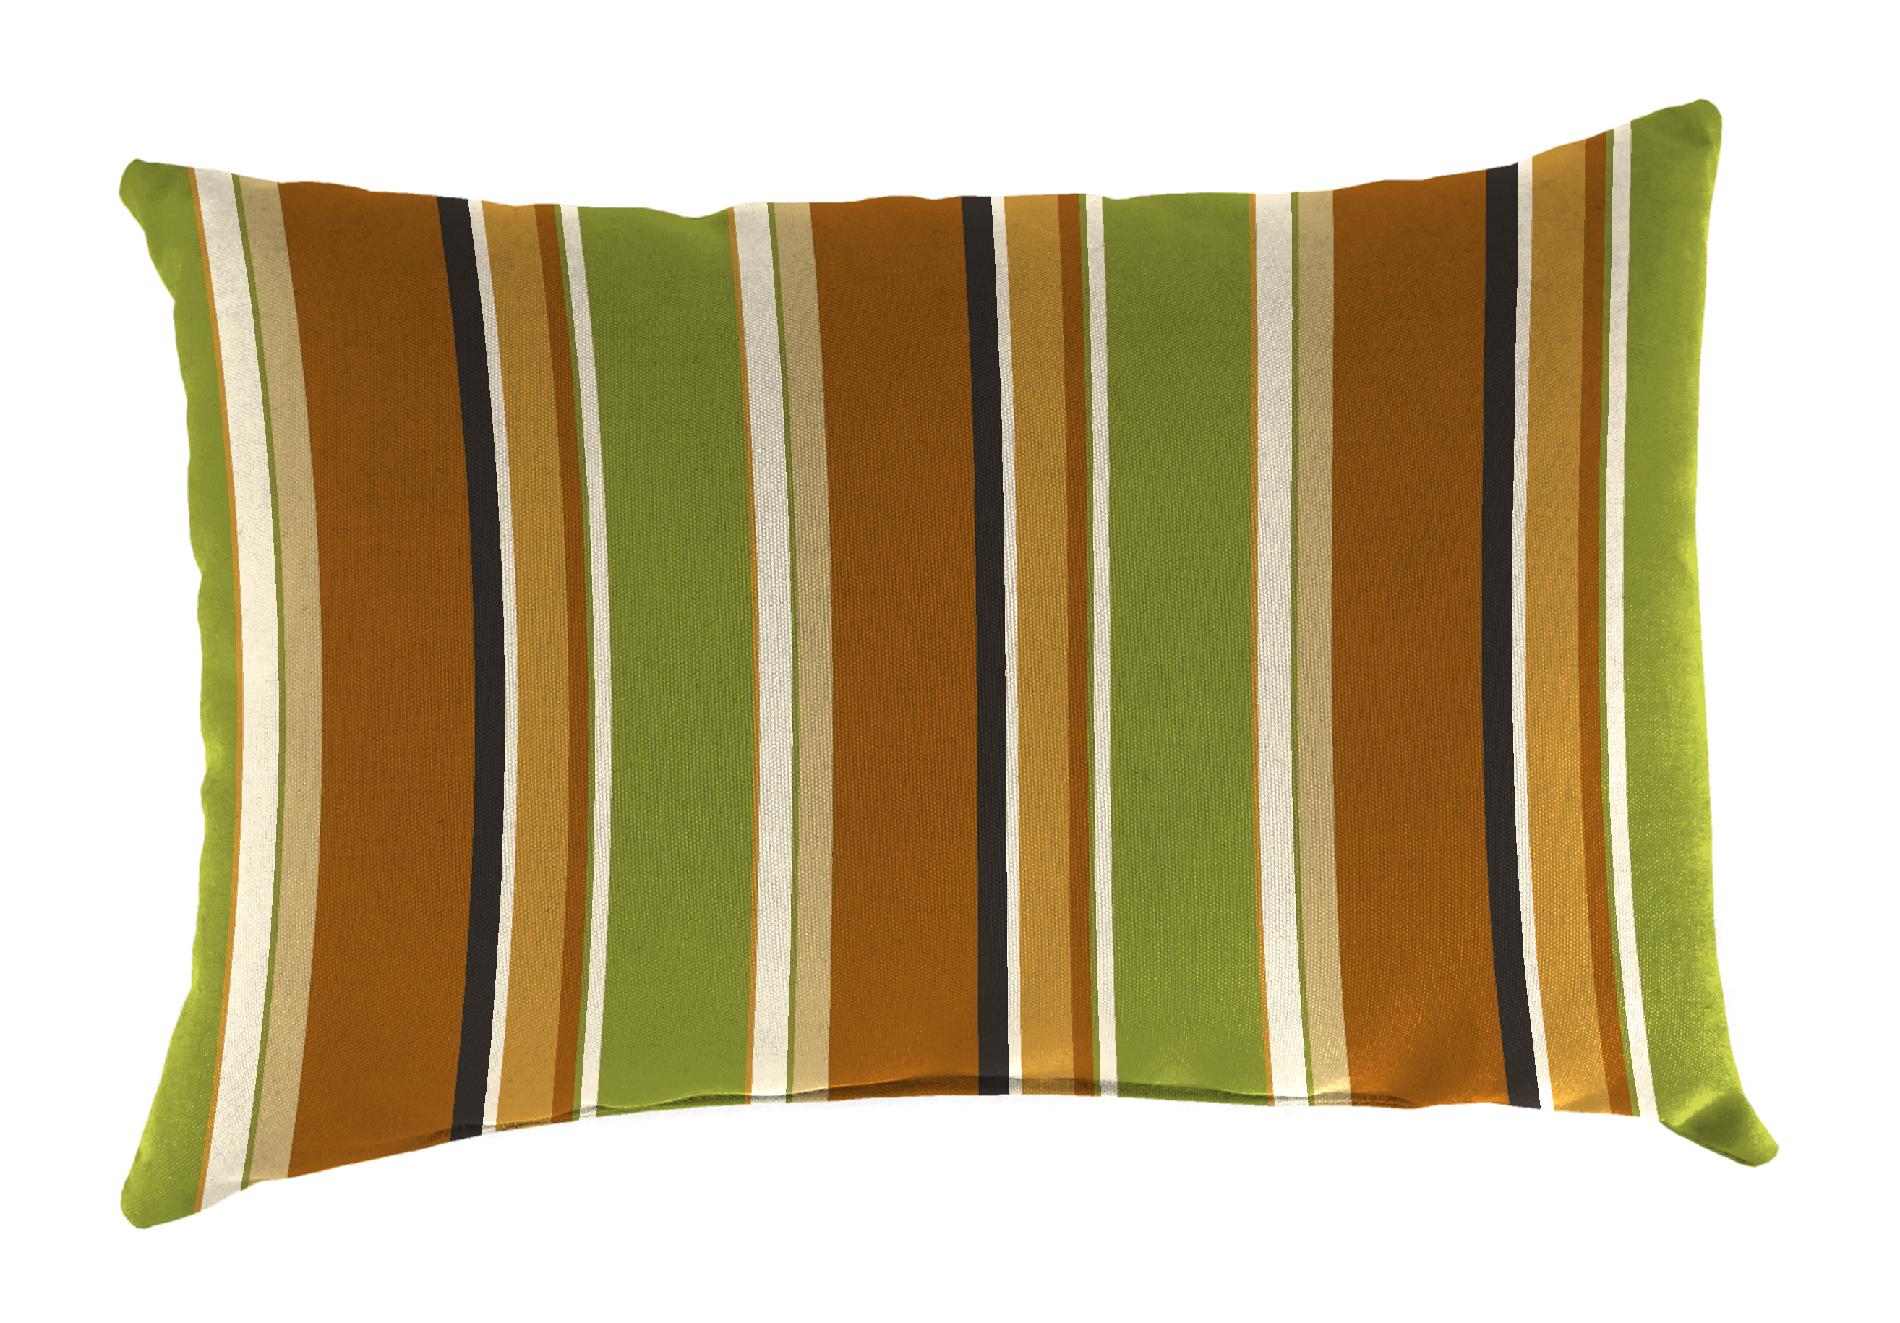 18" x 12" Toss Pillow  in Martindale Stripe Maple